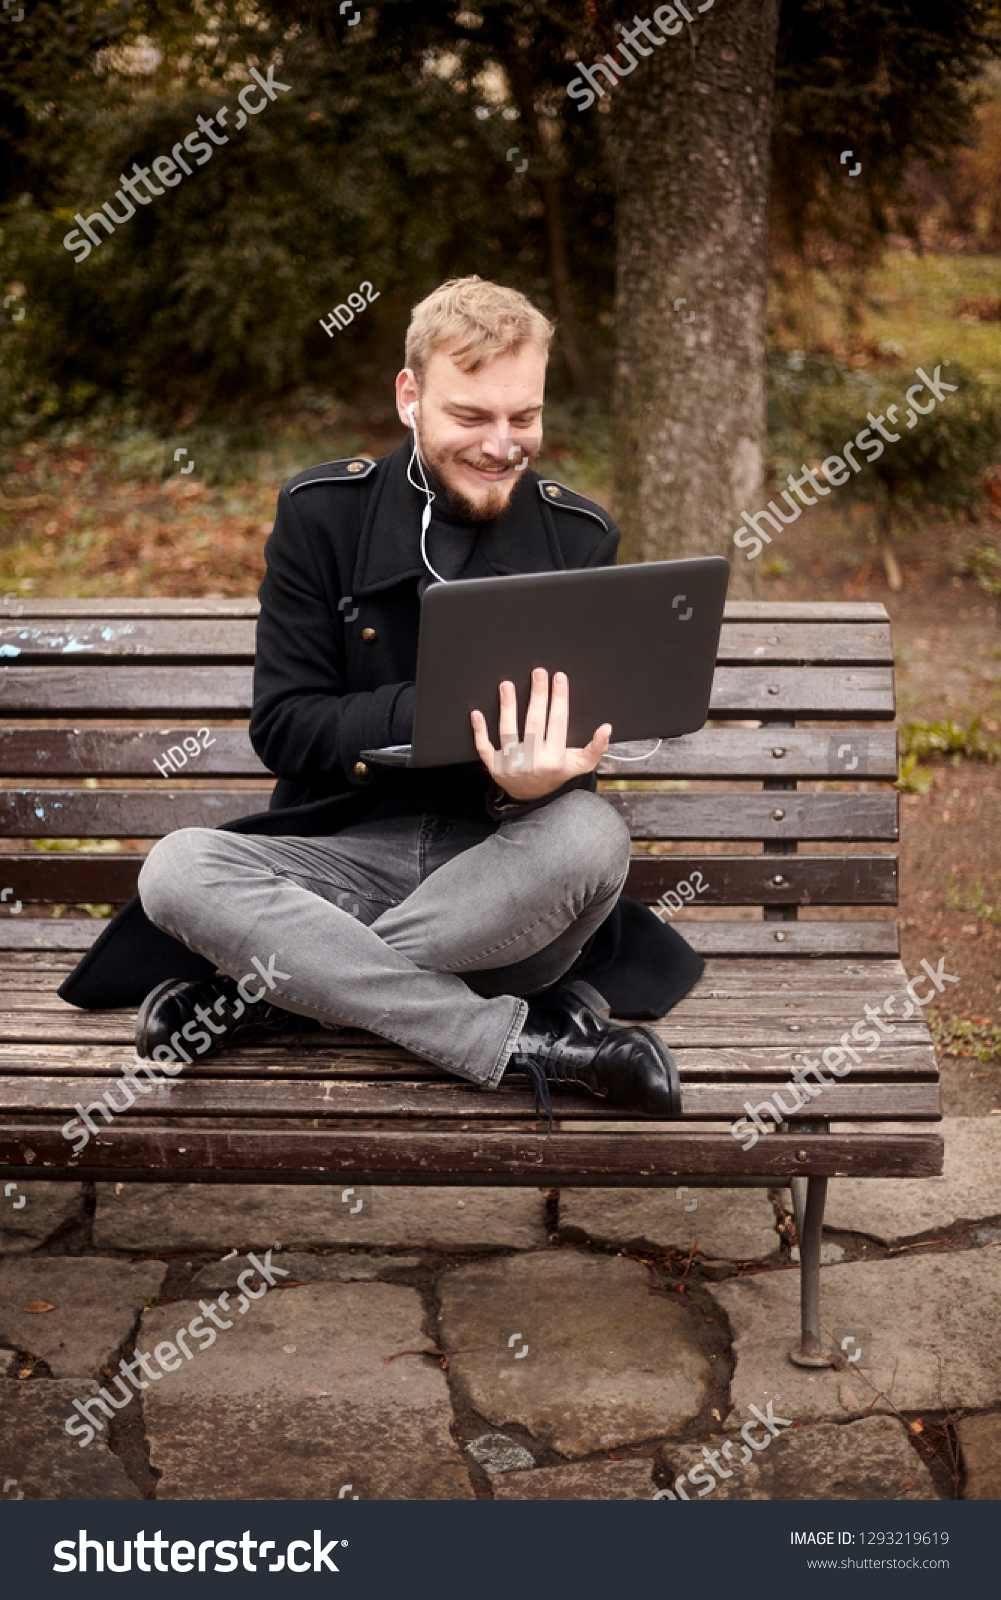 one young relaxed and smiling man, sitting casually on bench with crossed legs in public park, using laptop holding it with one hand. Formal wear or smart casual. Full length shot. #1293219619